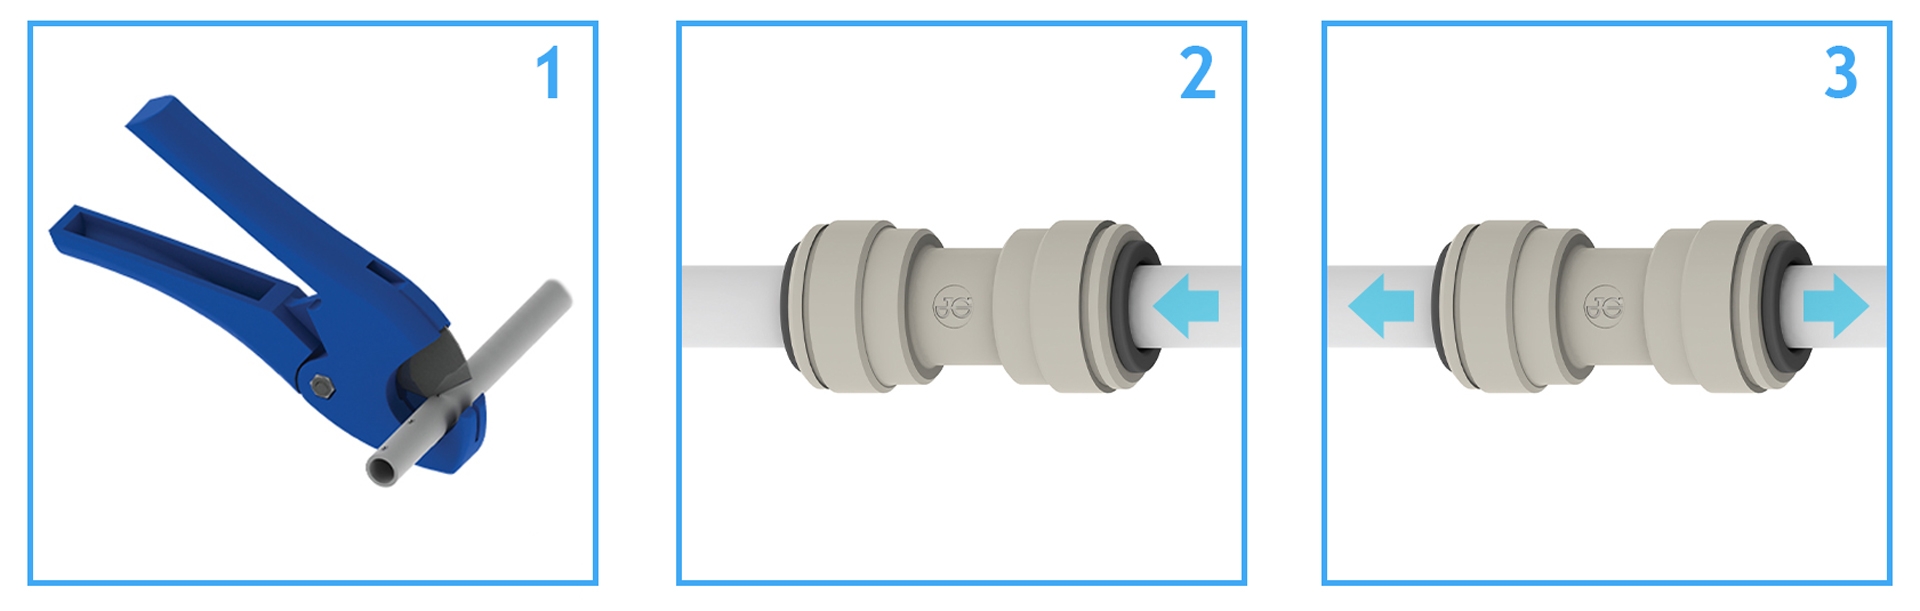 Connector Type-I (PF JG 1/4” – Thead Male 1/4”) info 4.1